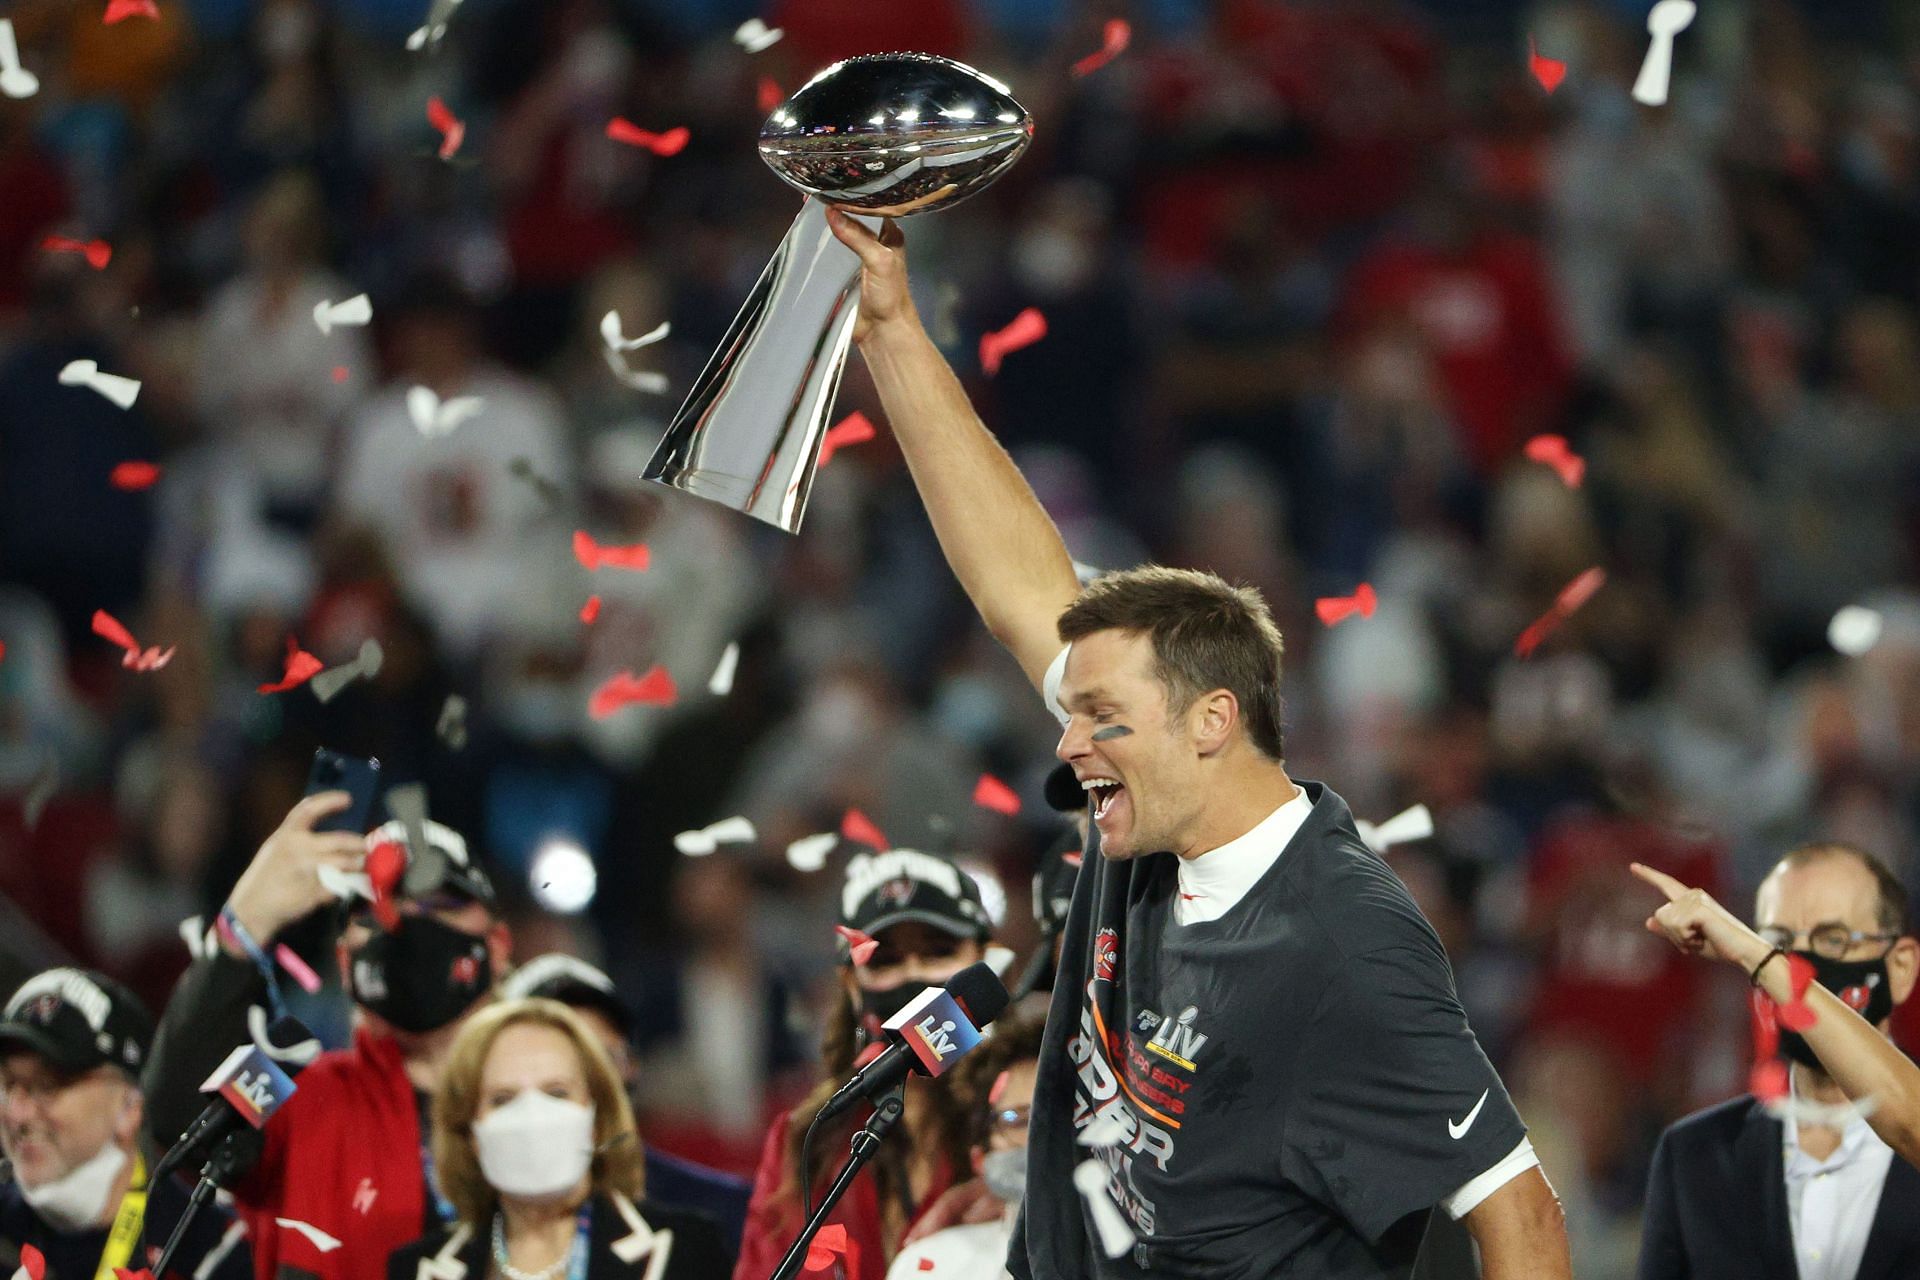 NFL Players With The Most Super Bowl Wins